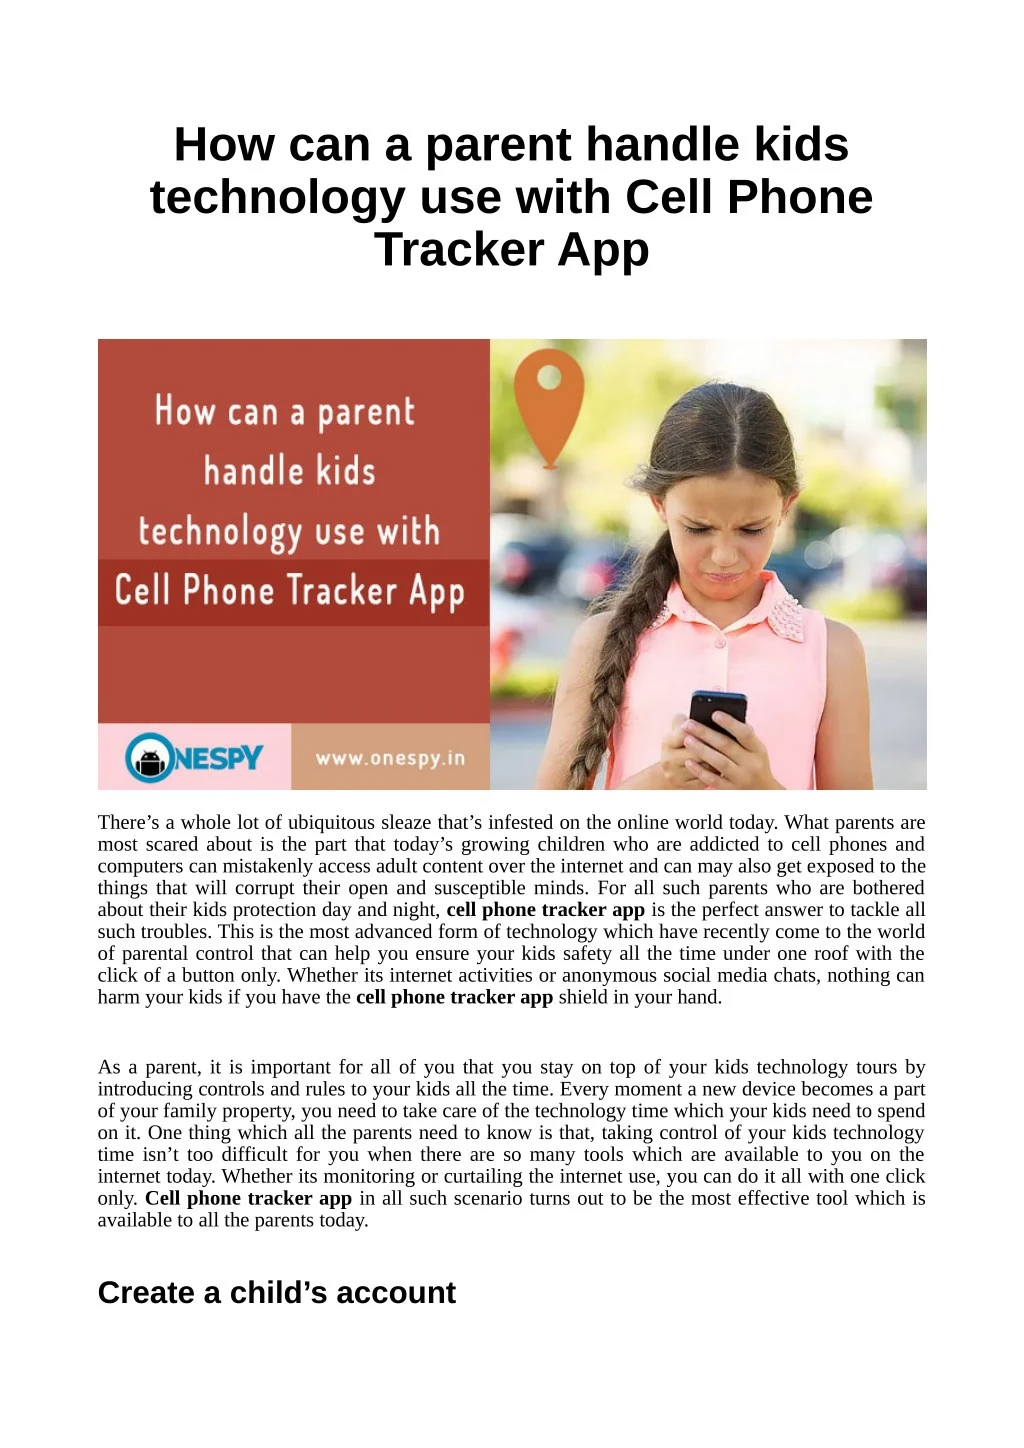 how can a parent handle kids technology use with